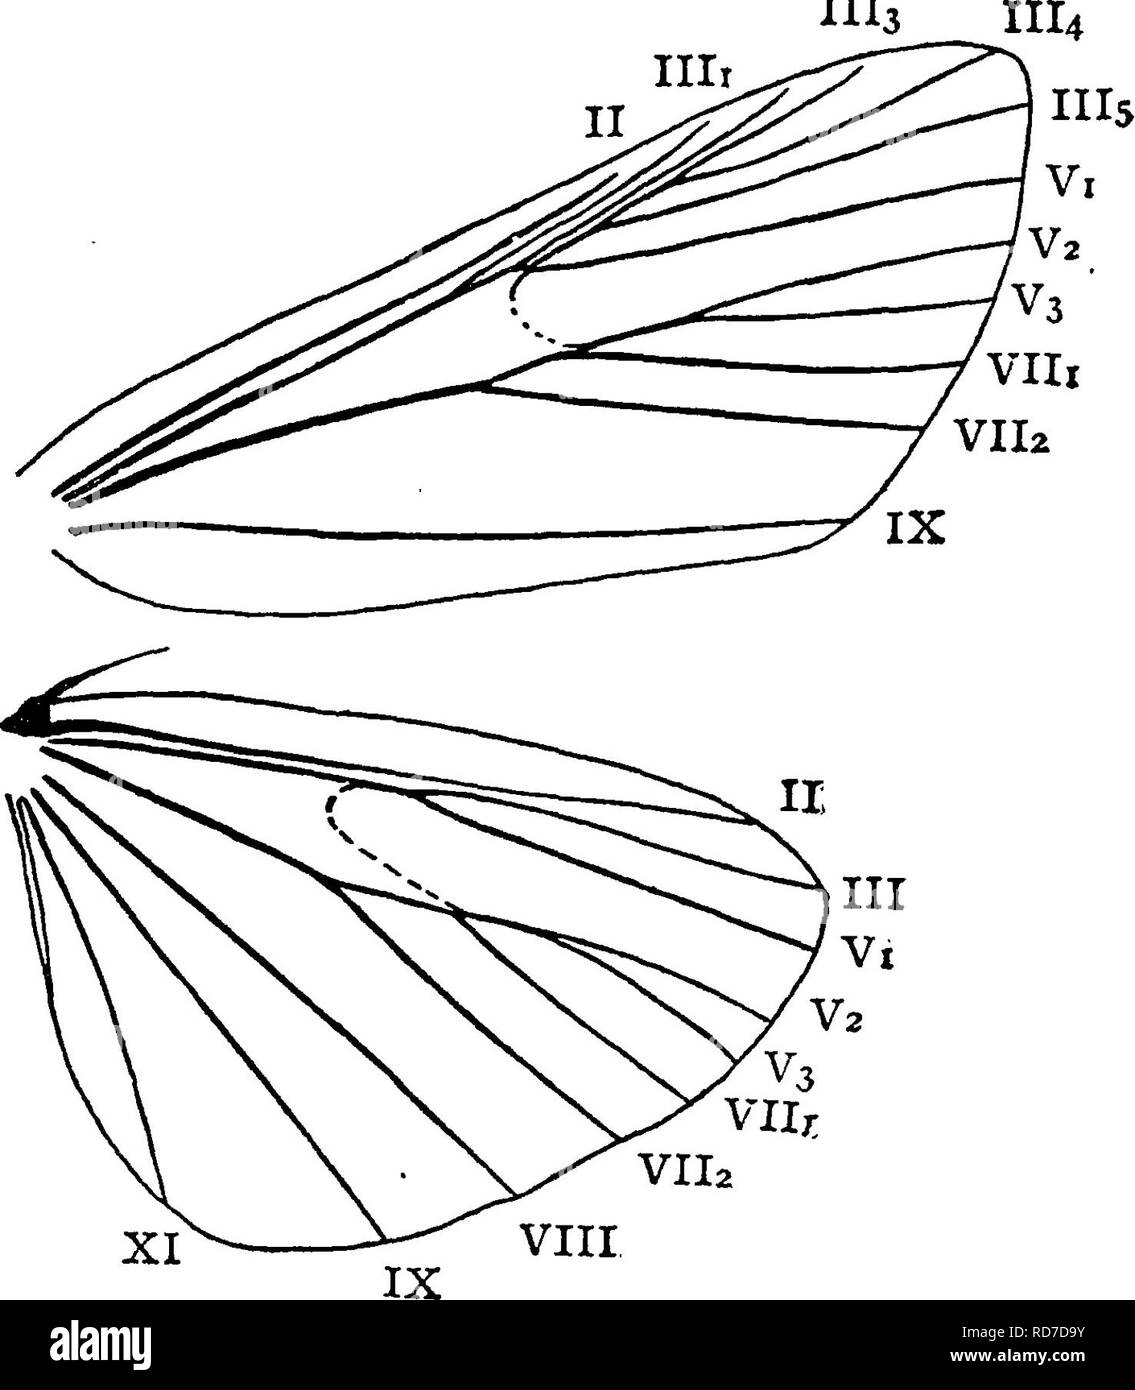 . A manual for the study of insects. Insects. LEPIDOPTERA. 233 1113. The Meal-moth, Pyralis farinalis (Pyr'a-lis far-i-na'lis) is a common species. The larva feeds on jjj^ meal, flour, and old clover-hay. The moth is commonly found near the food of the larva, but is often seen on the ceilings of rooms sitting with its tail curved over its back. It expands about an inch ; the fore wings are light brown, crossed by two curved white lines, and with a dark chocolate-brown spot on the base and tip of each. The Clover-hay Worm, Pyralis costalis (Pyr'a-lis cos-ta'- Hs). The larva of this species some Stock Photo